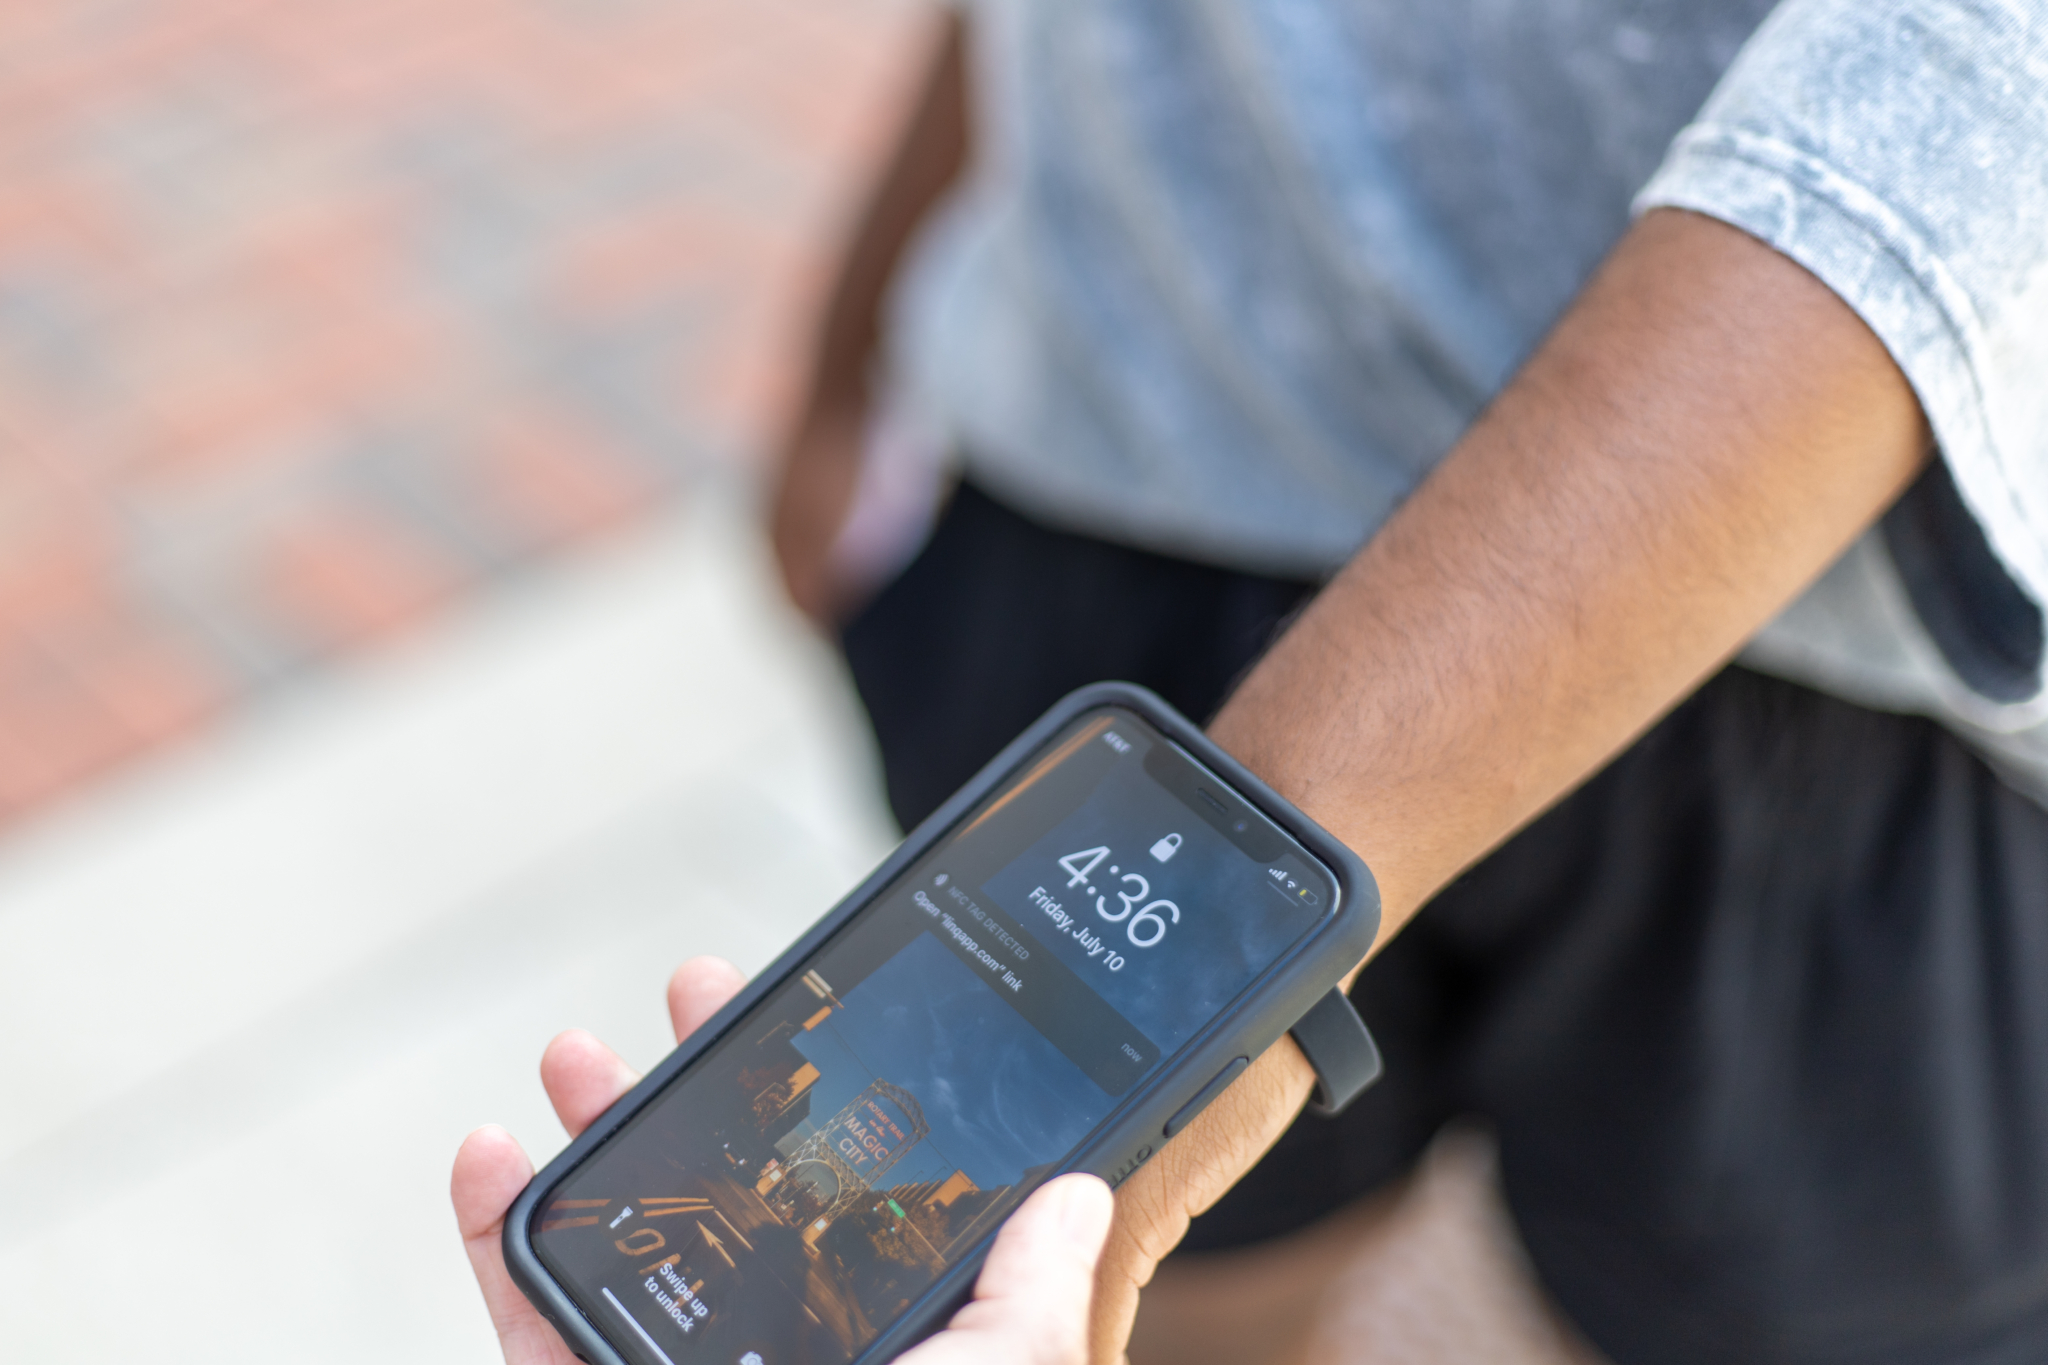 Linq 5706 Local tech startup launches $5 smart bracelet to share Black Lives Matter resources